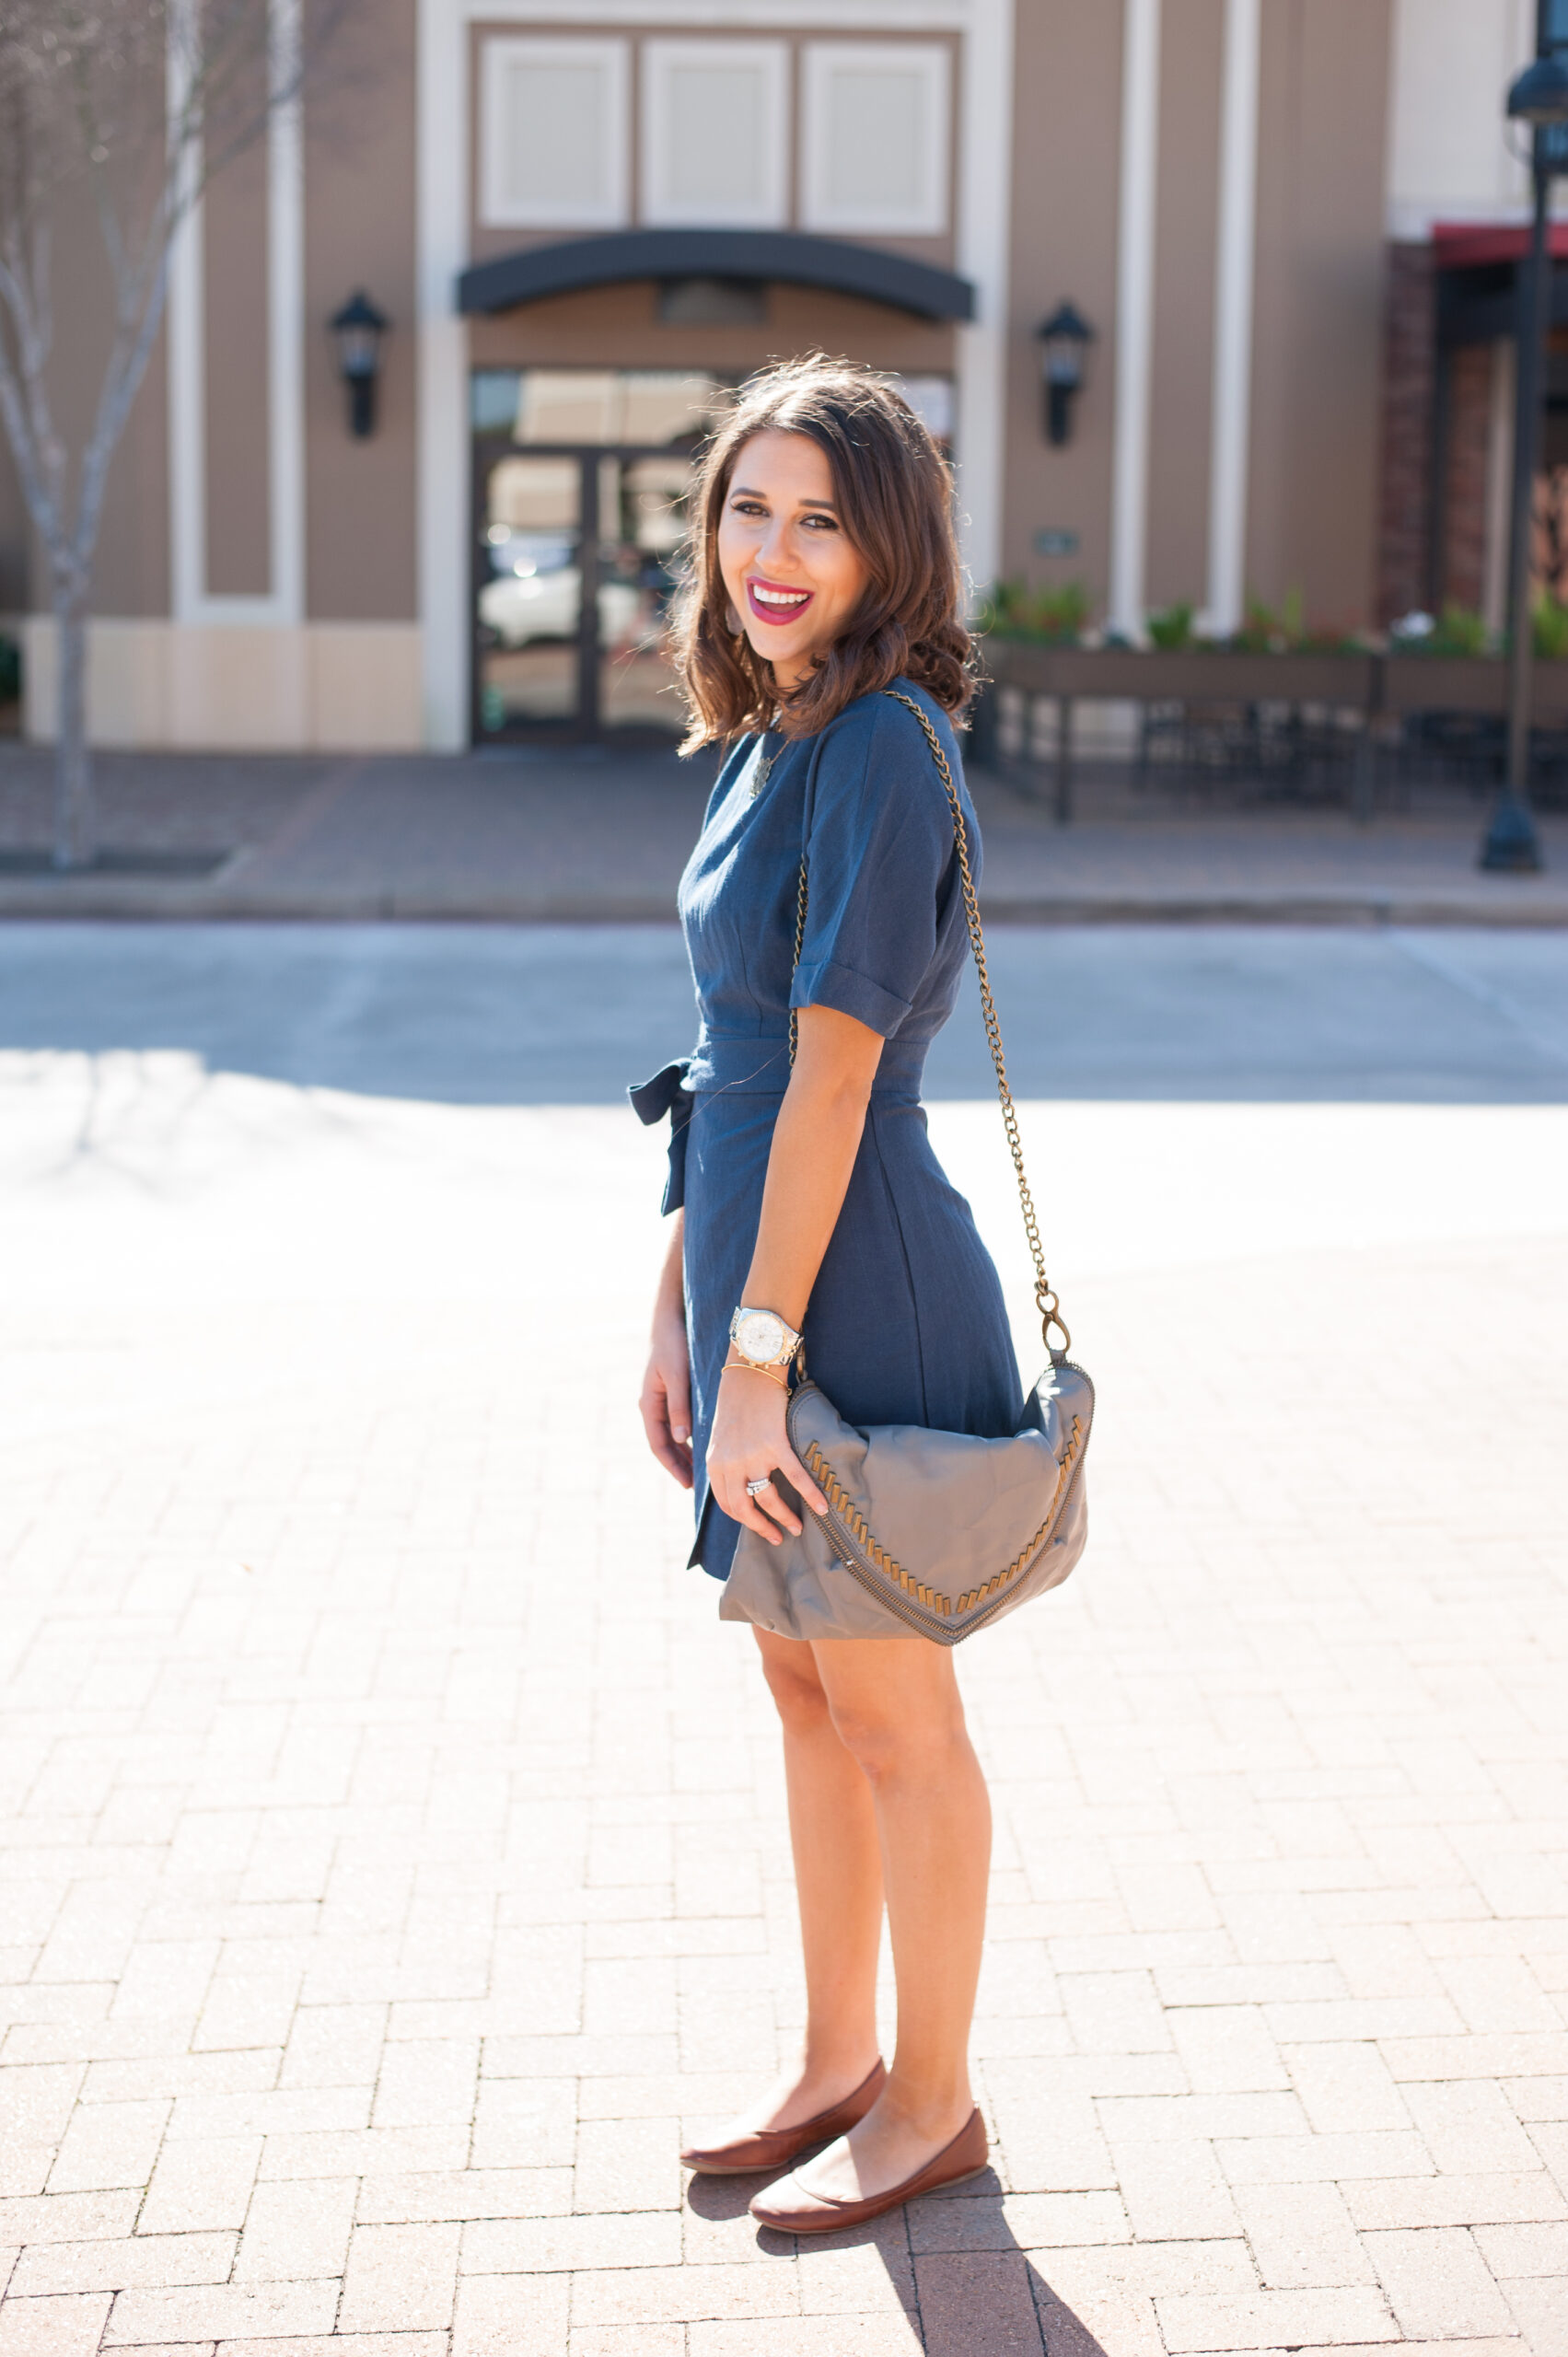 dress_up_buttercup_dede_raad_fashion_blogger_houston (14 of 15)